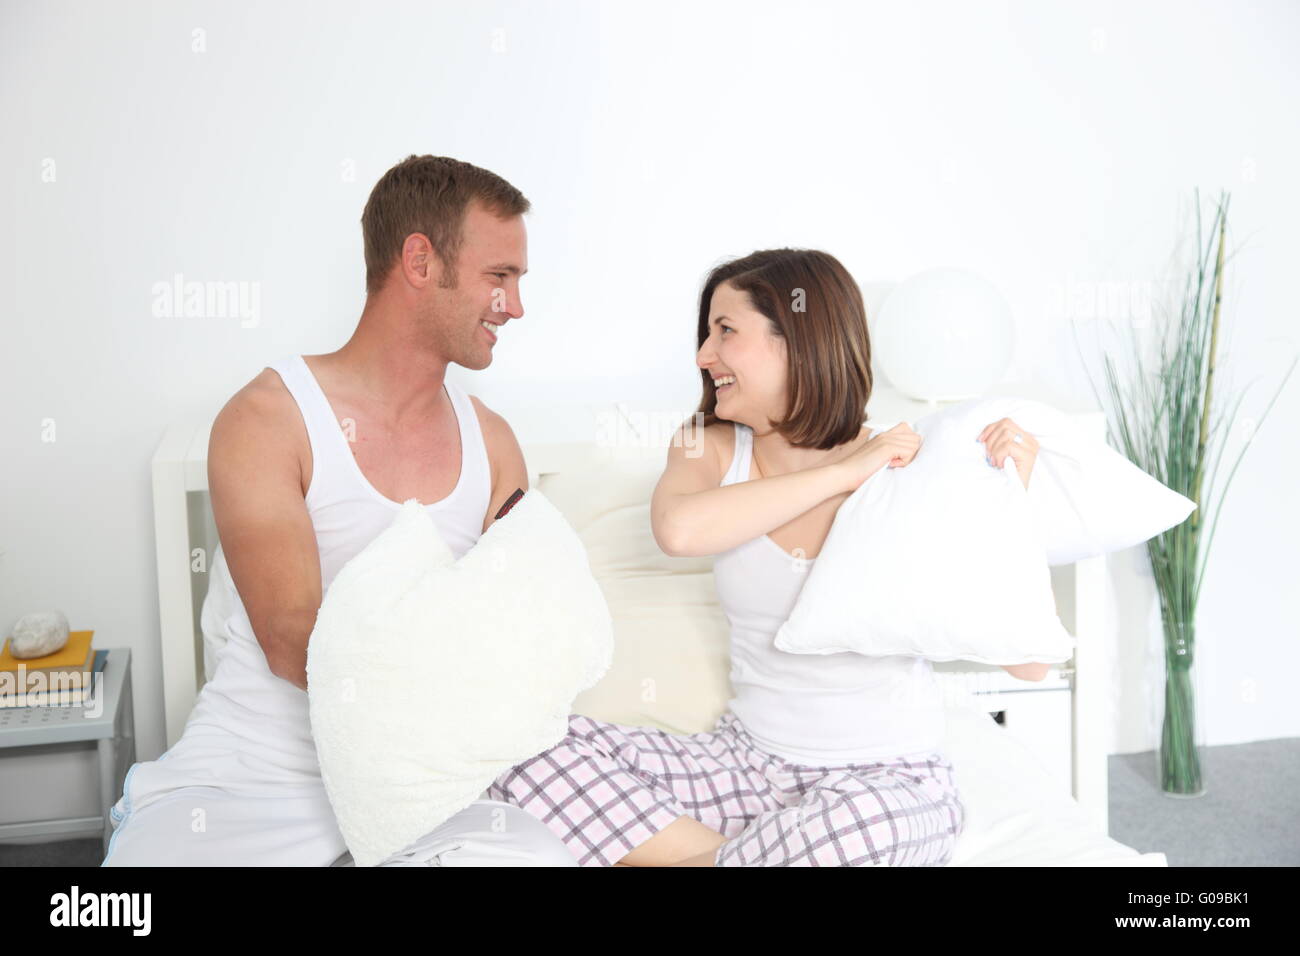 Laughing young couple pillow fighting in bed Stock Photo